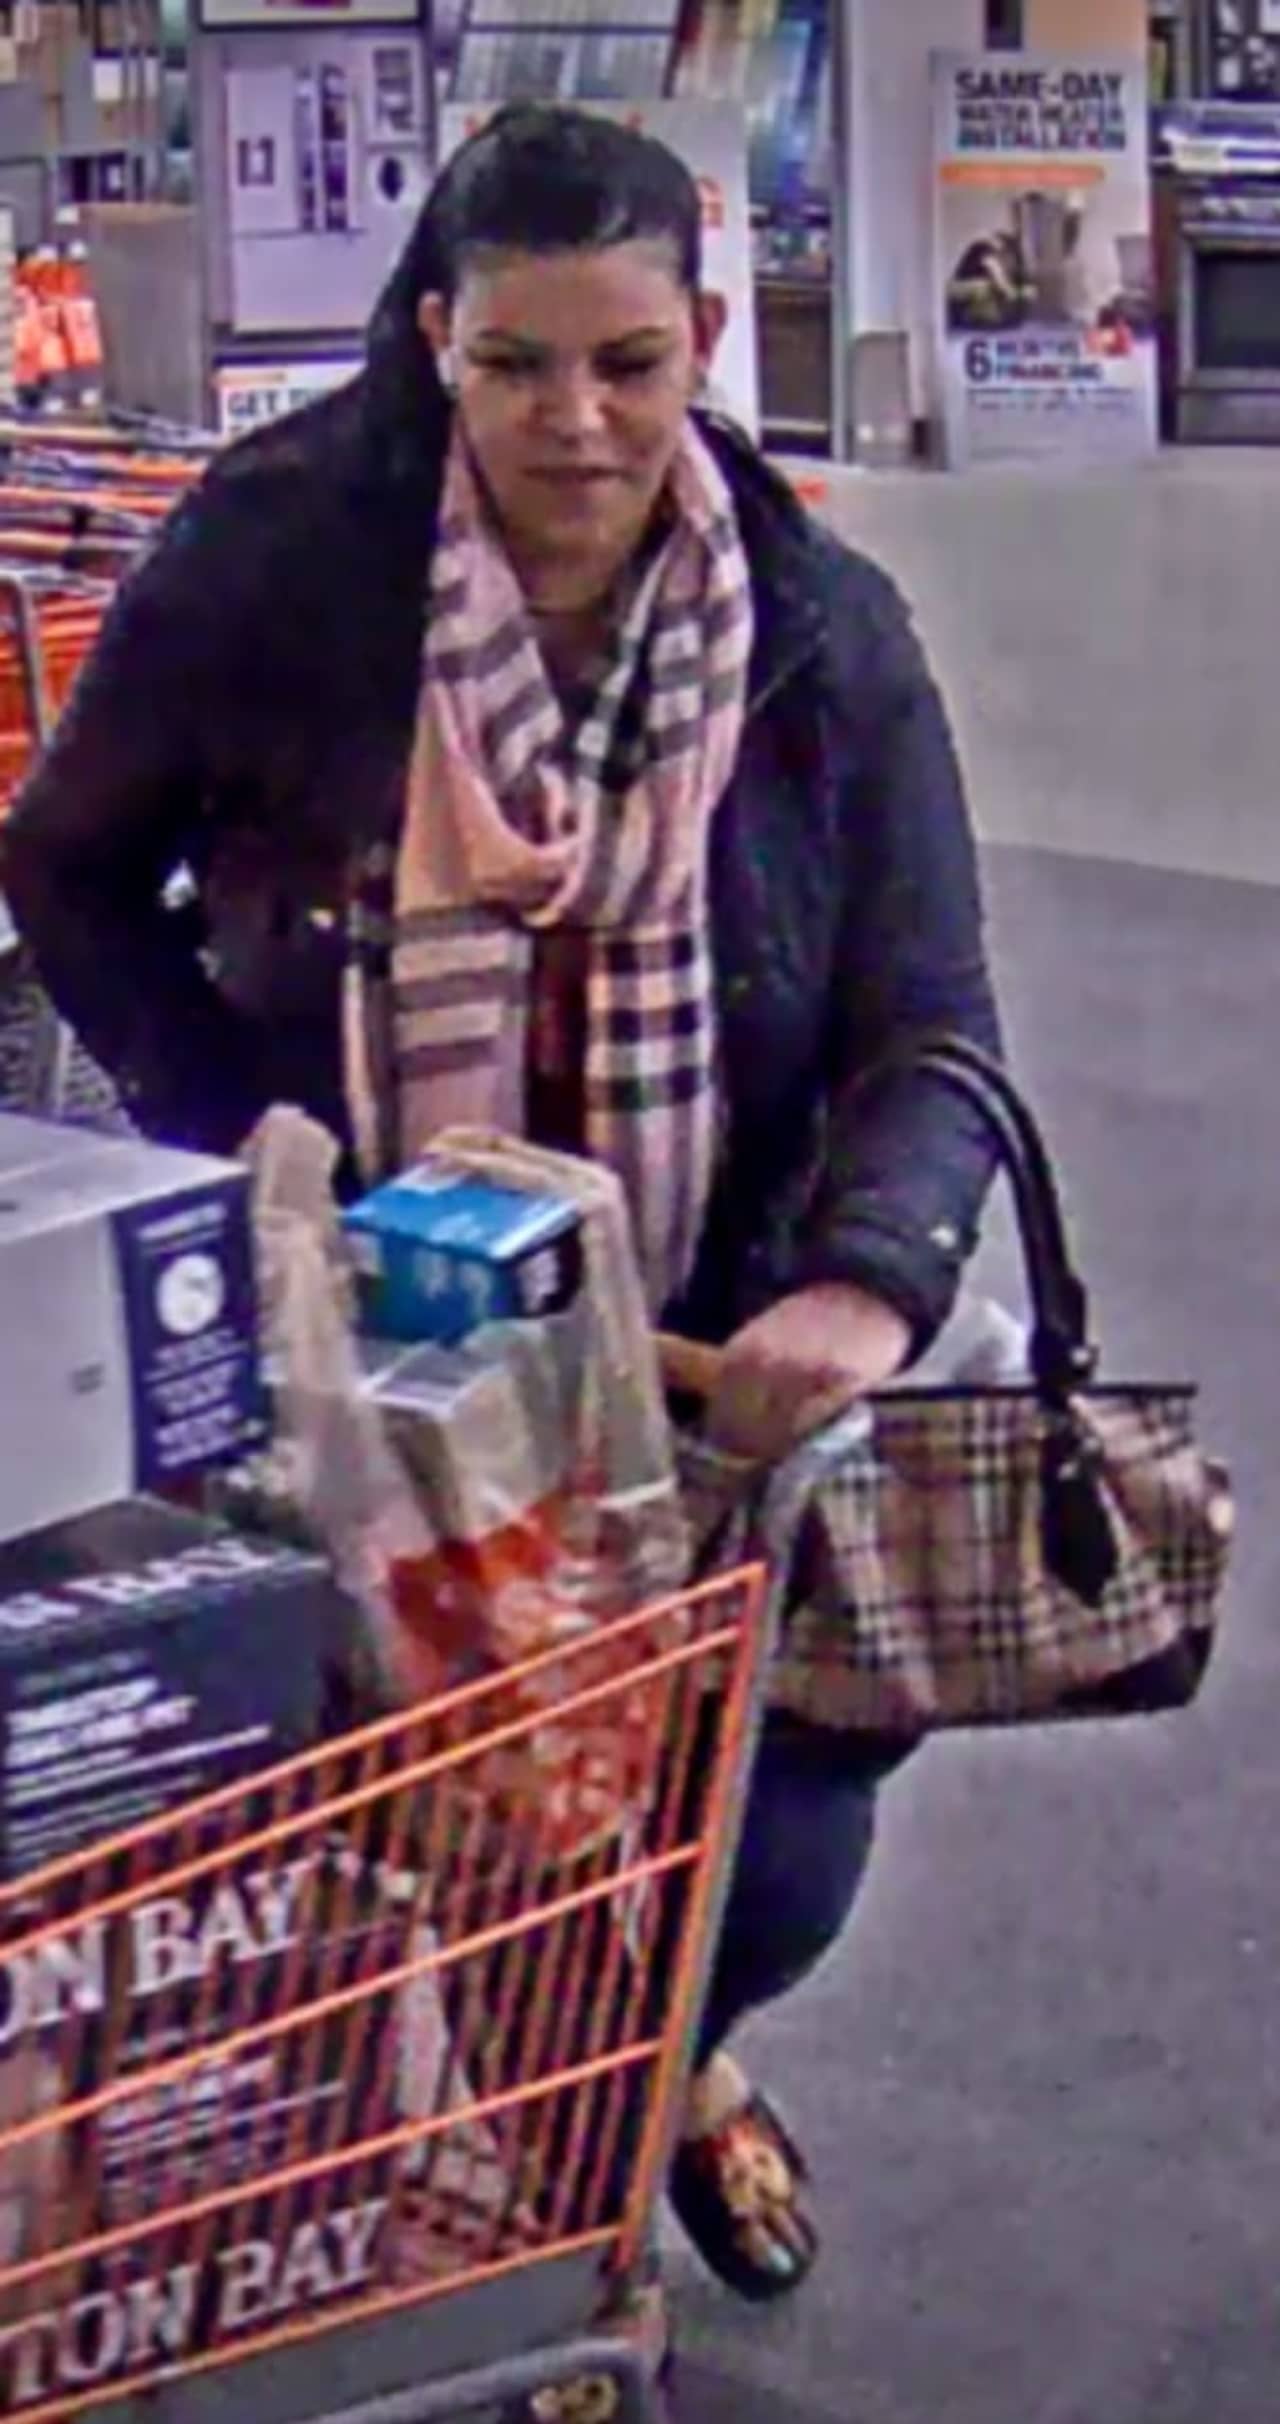 Have you seen her? Old Bridge Township police are looking for a woman suspected of racking up $13,000 in goods on a fraudulent credit card.